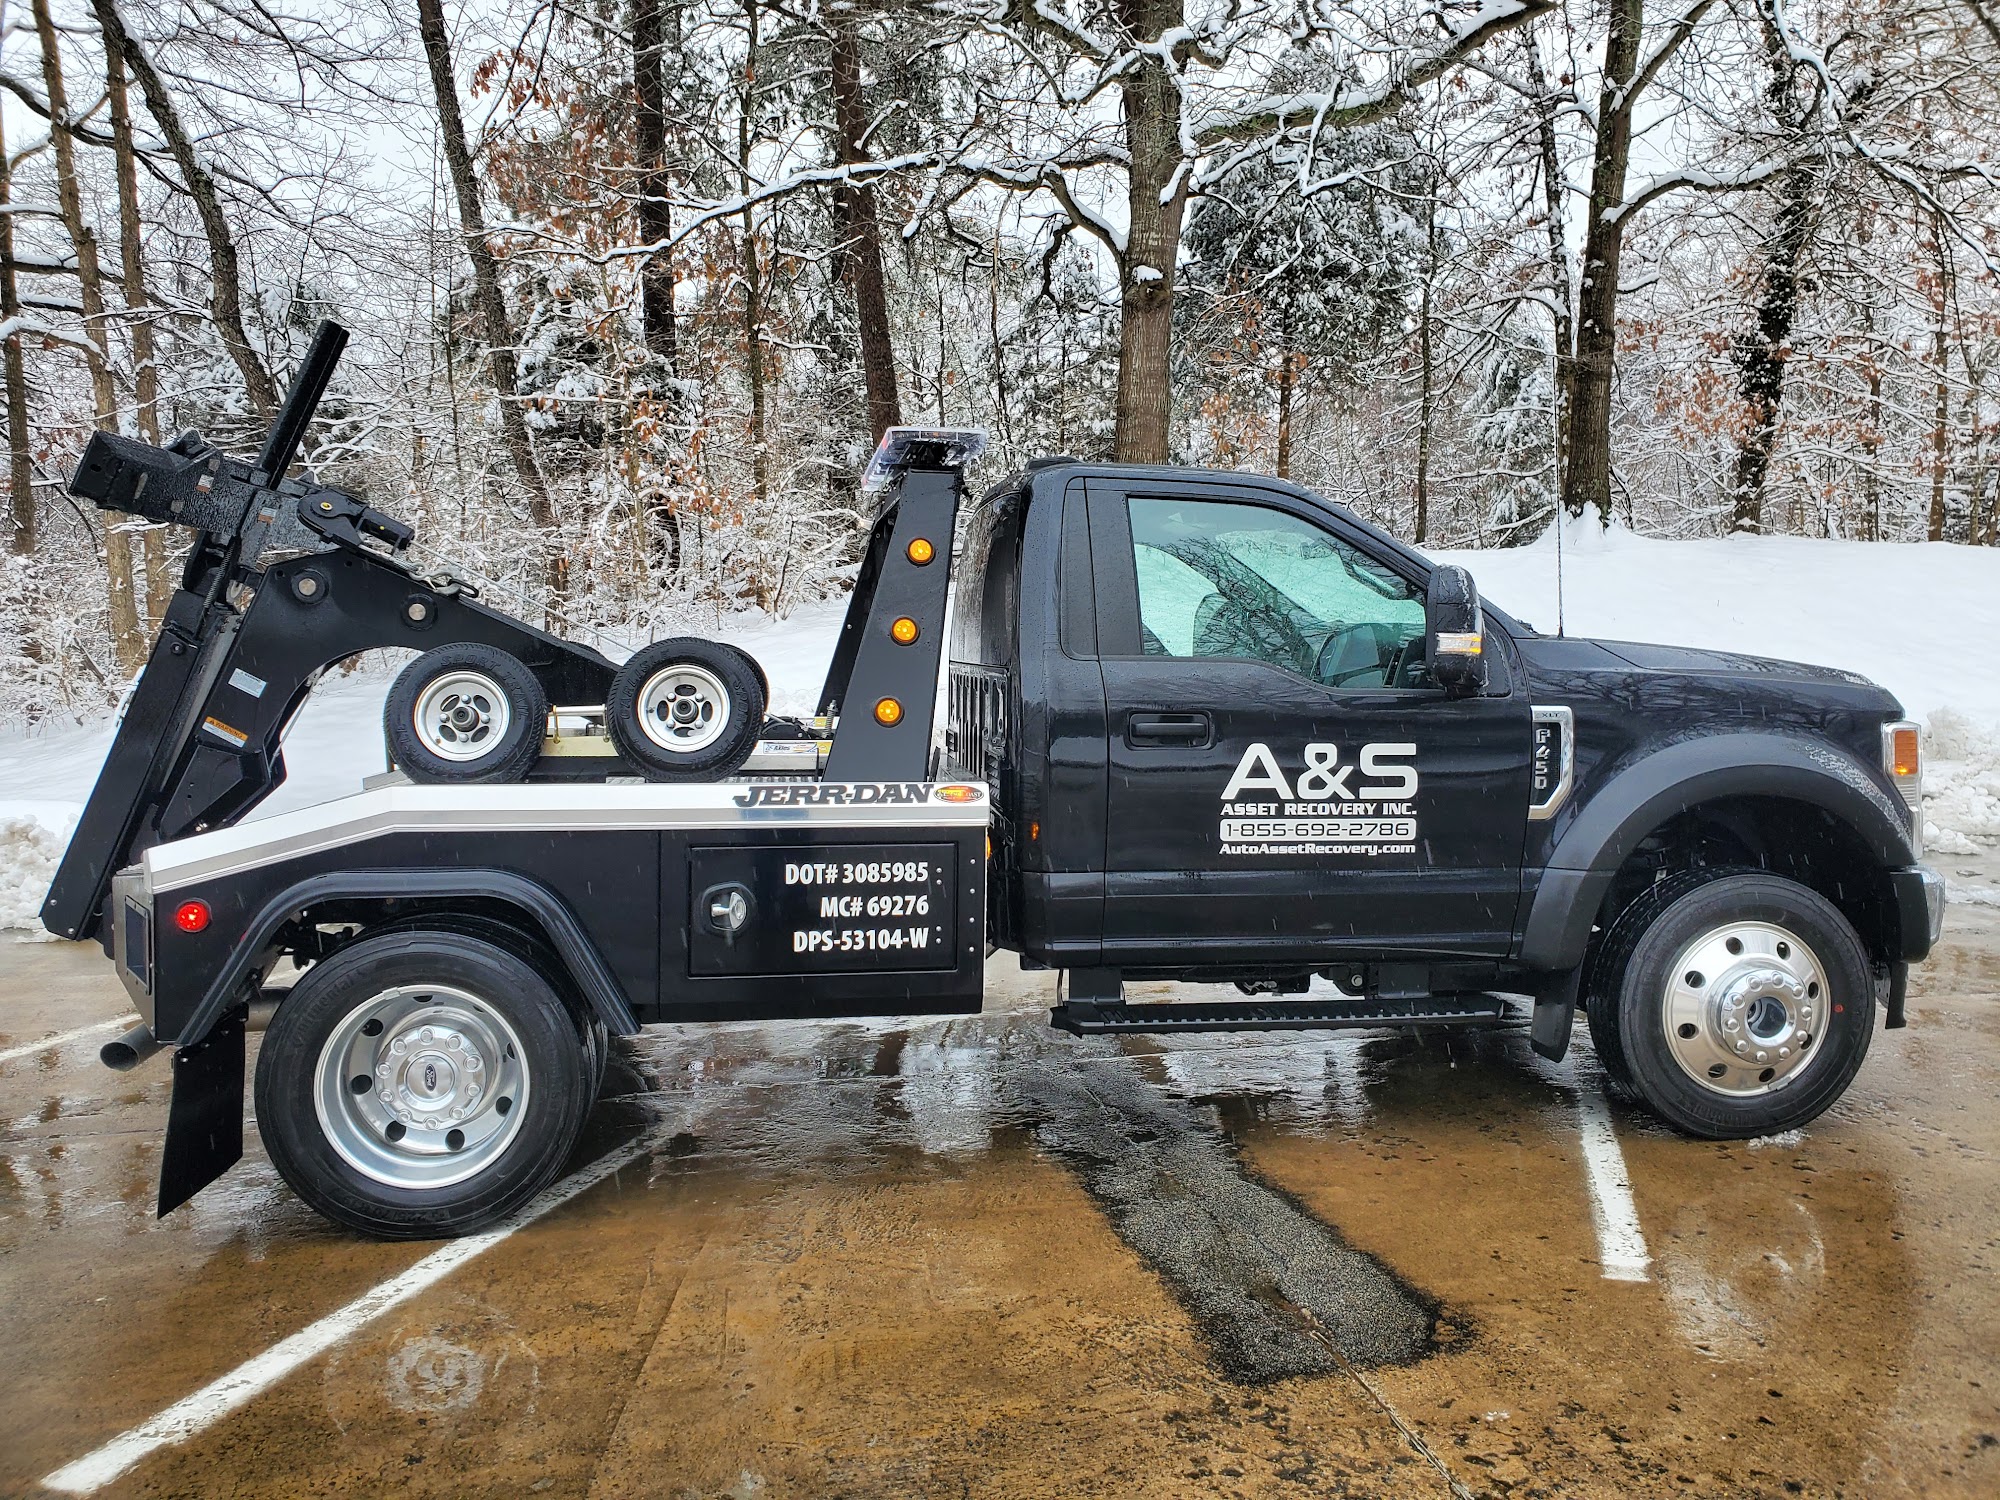 A&S ASSET RECOVERY INC.